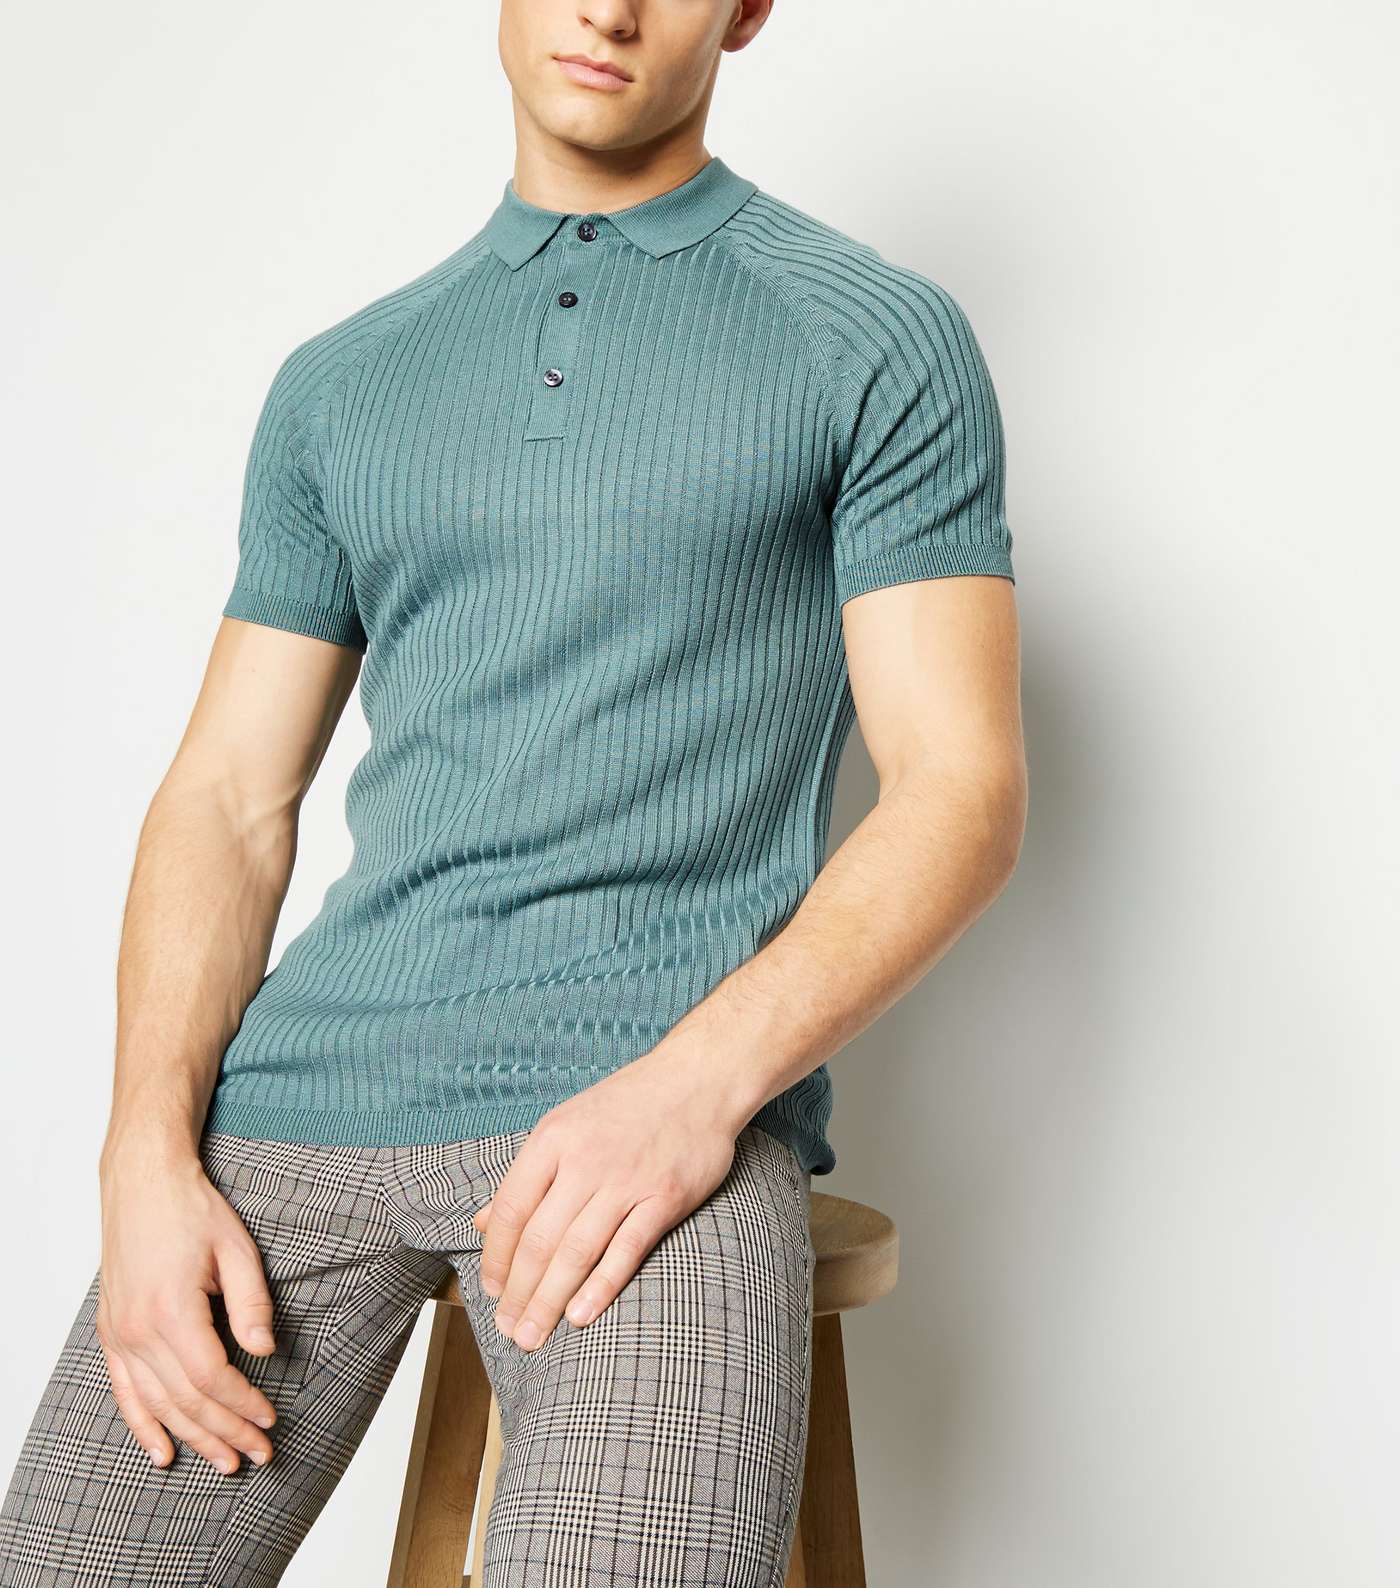 Teal Knit Muscle Fit Polo Shirt Image 5